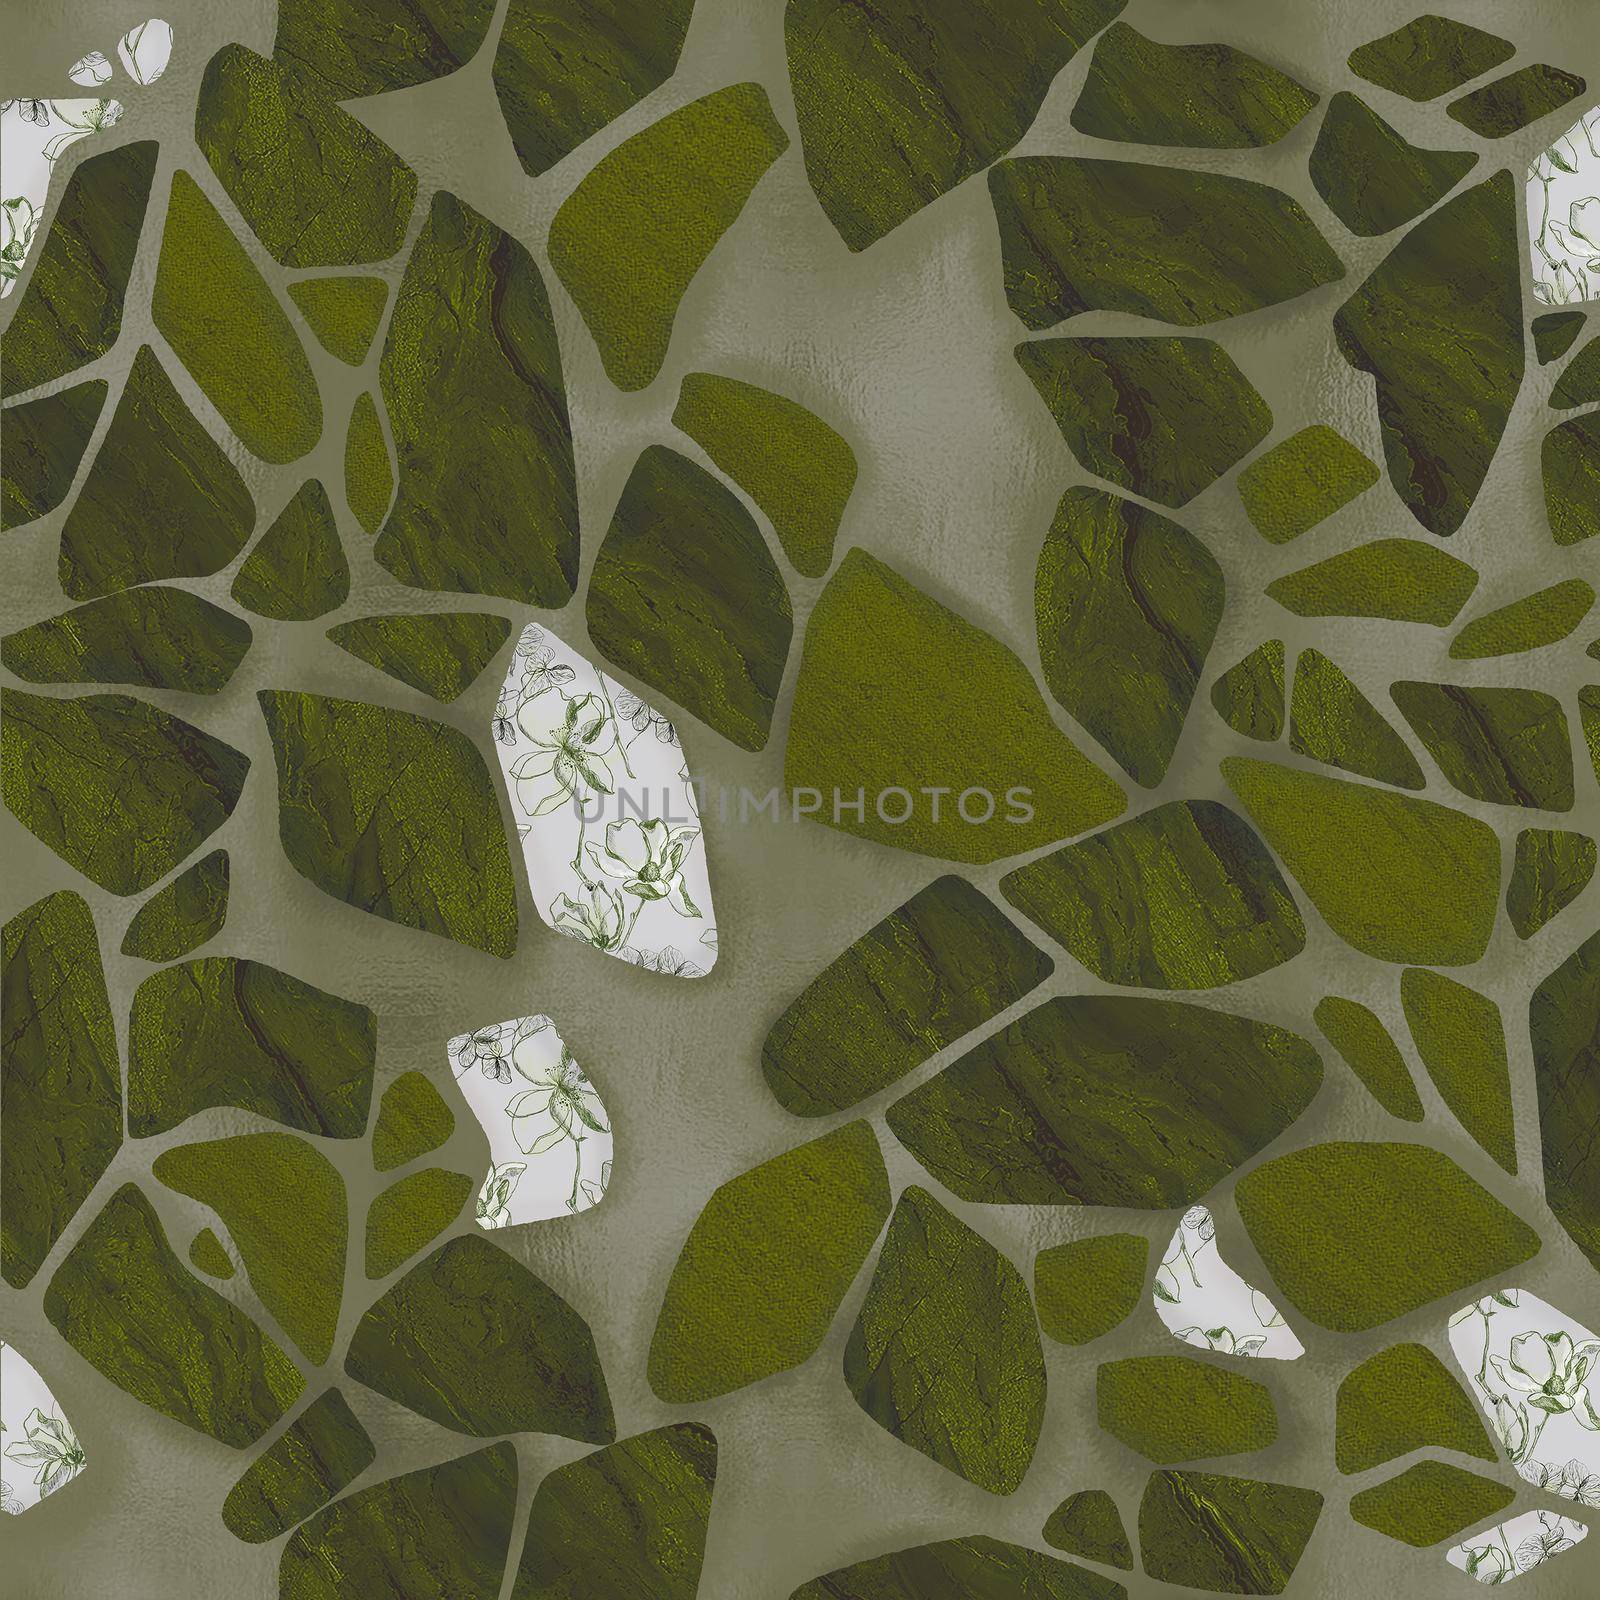 Green seamless pattern with cracked ceramic tile texture. Kintsugi style hand drawn illuastration by fireFLYart